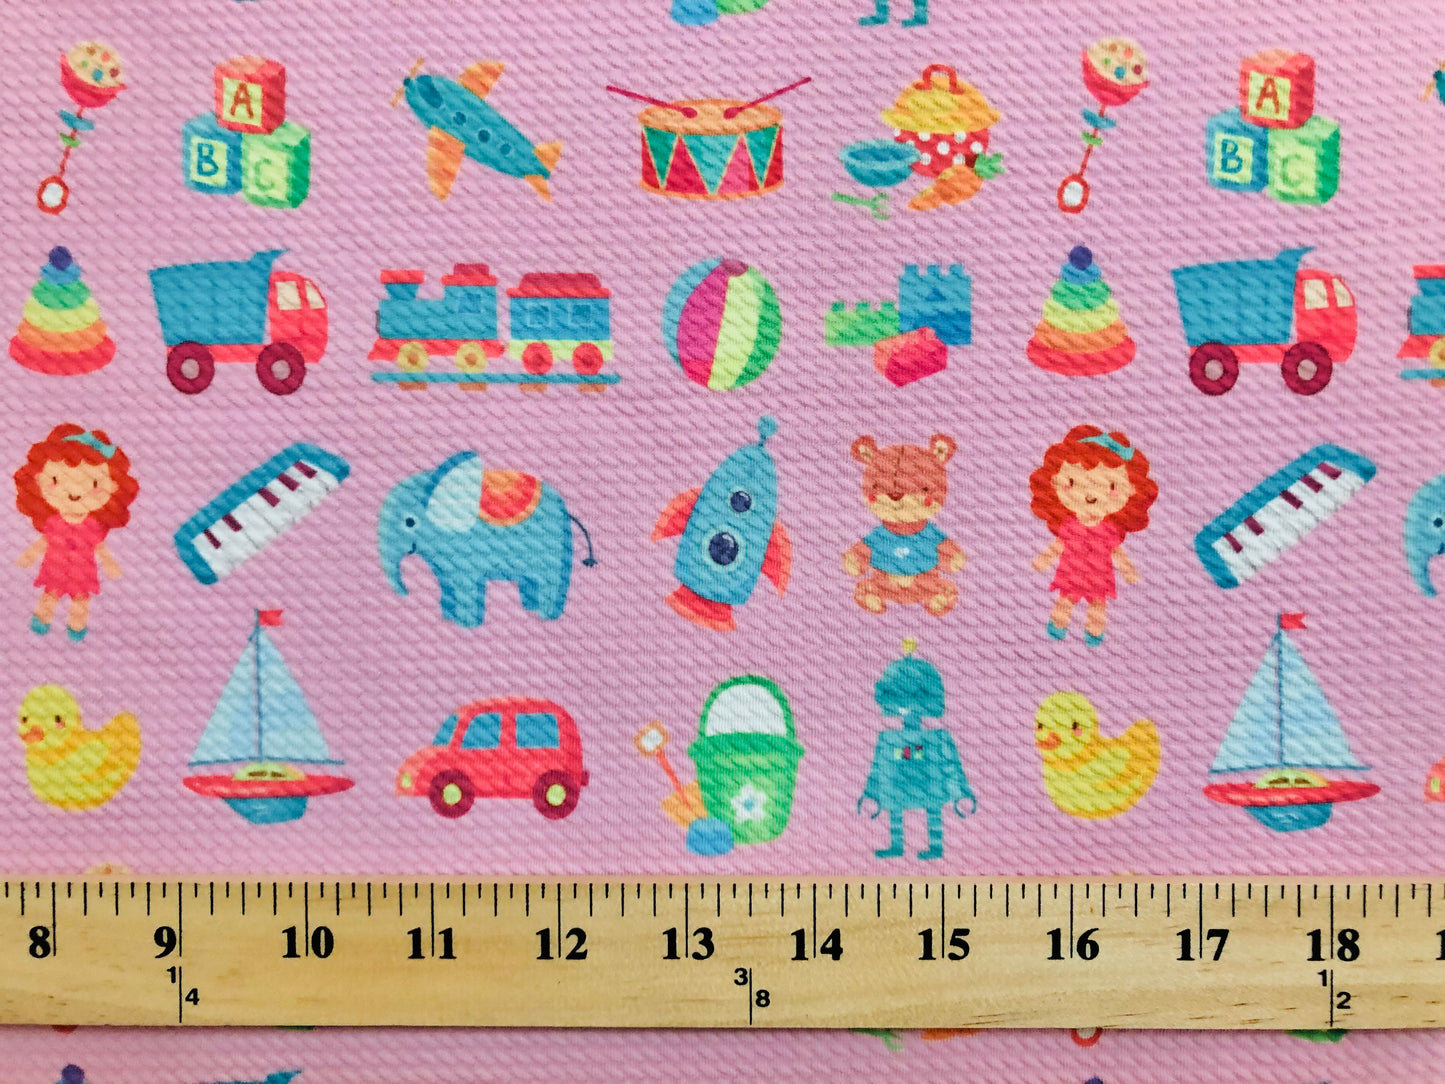 Bullet Knit Printed Fabric-Pink Blue Toys-BPR209-Sold by the Yard. Bulk Available